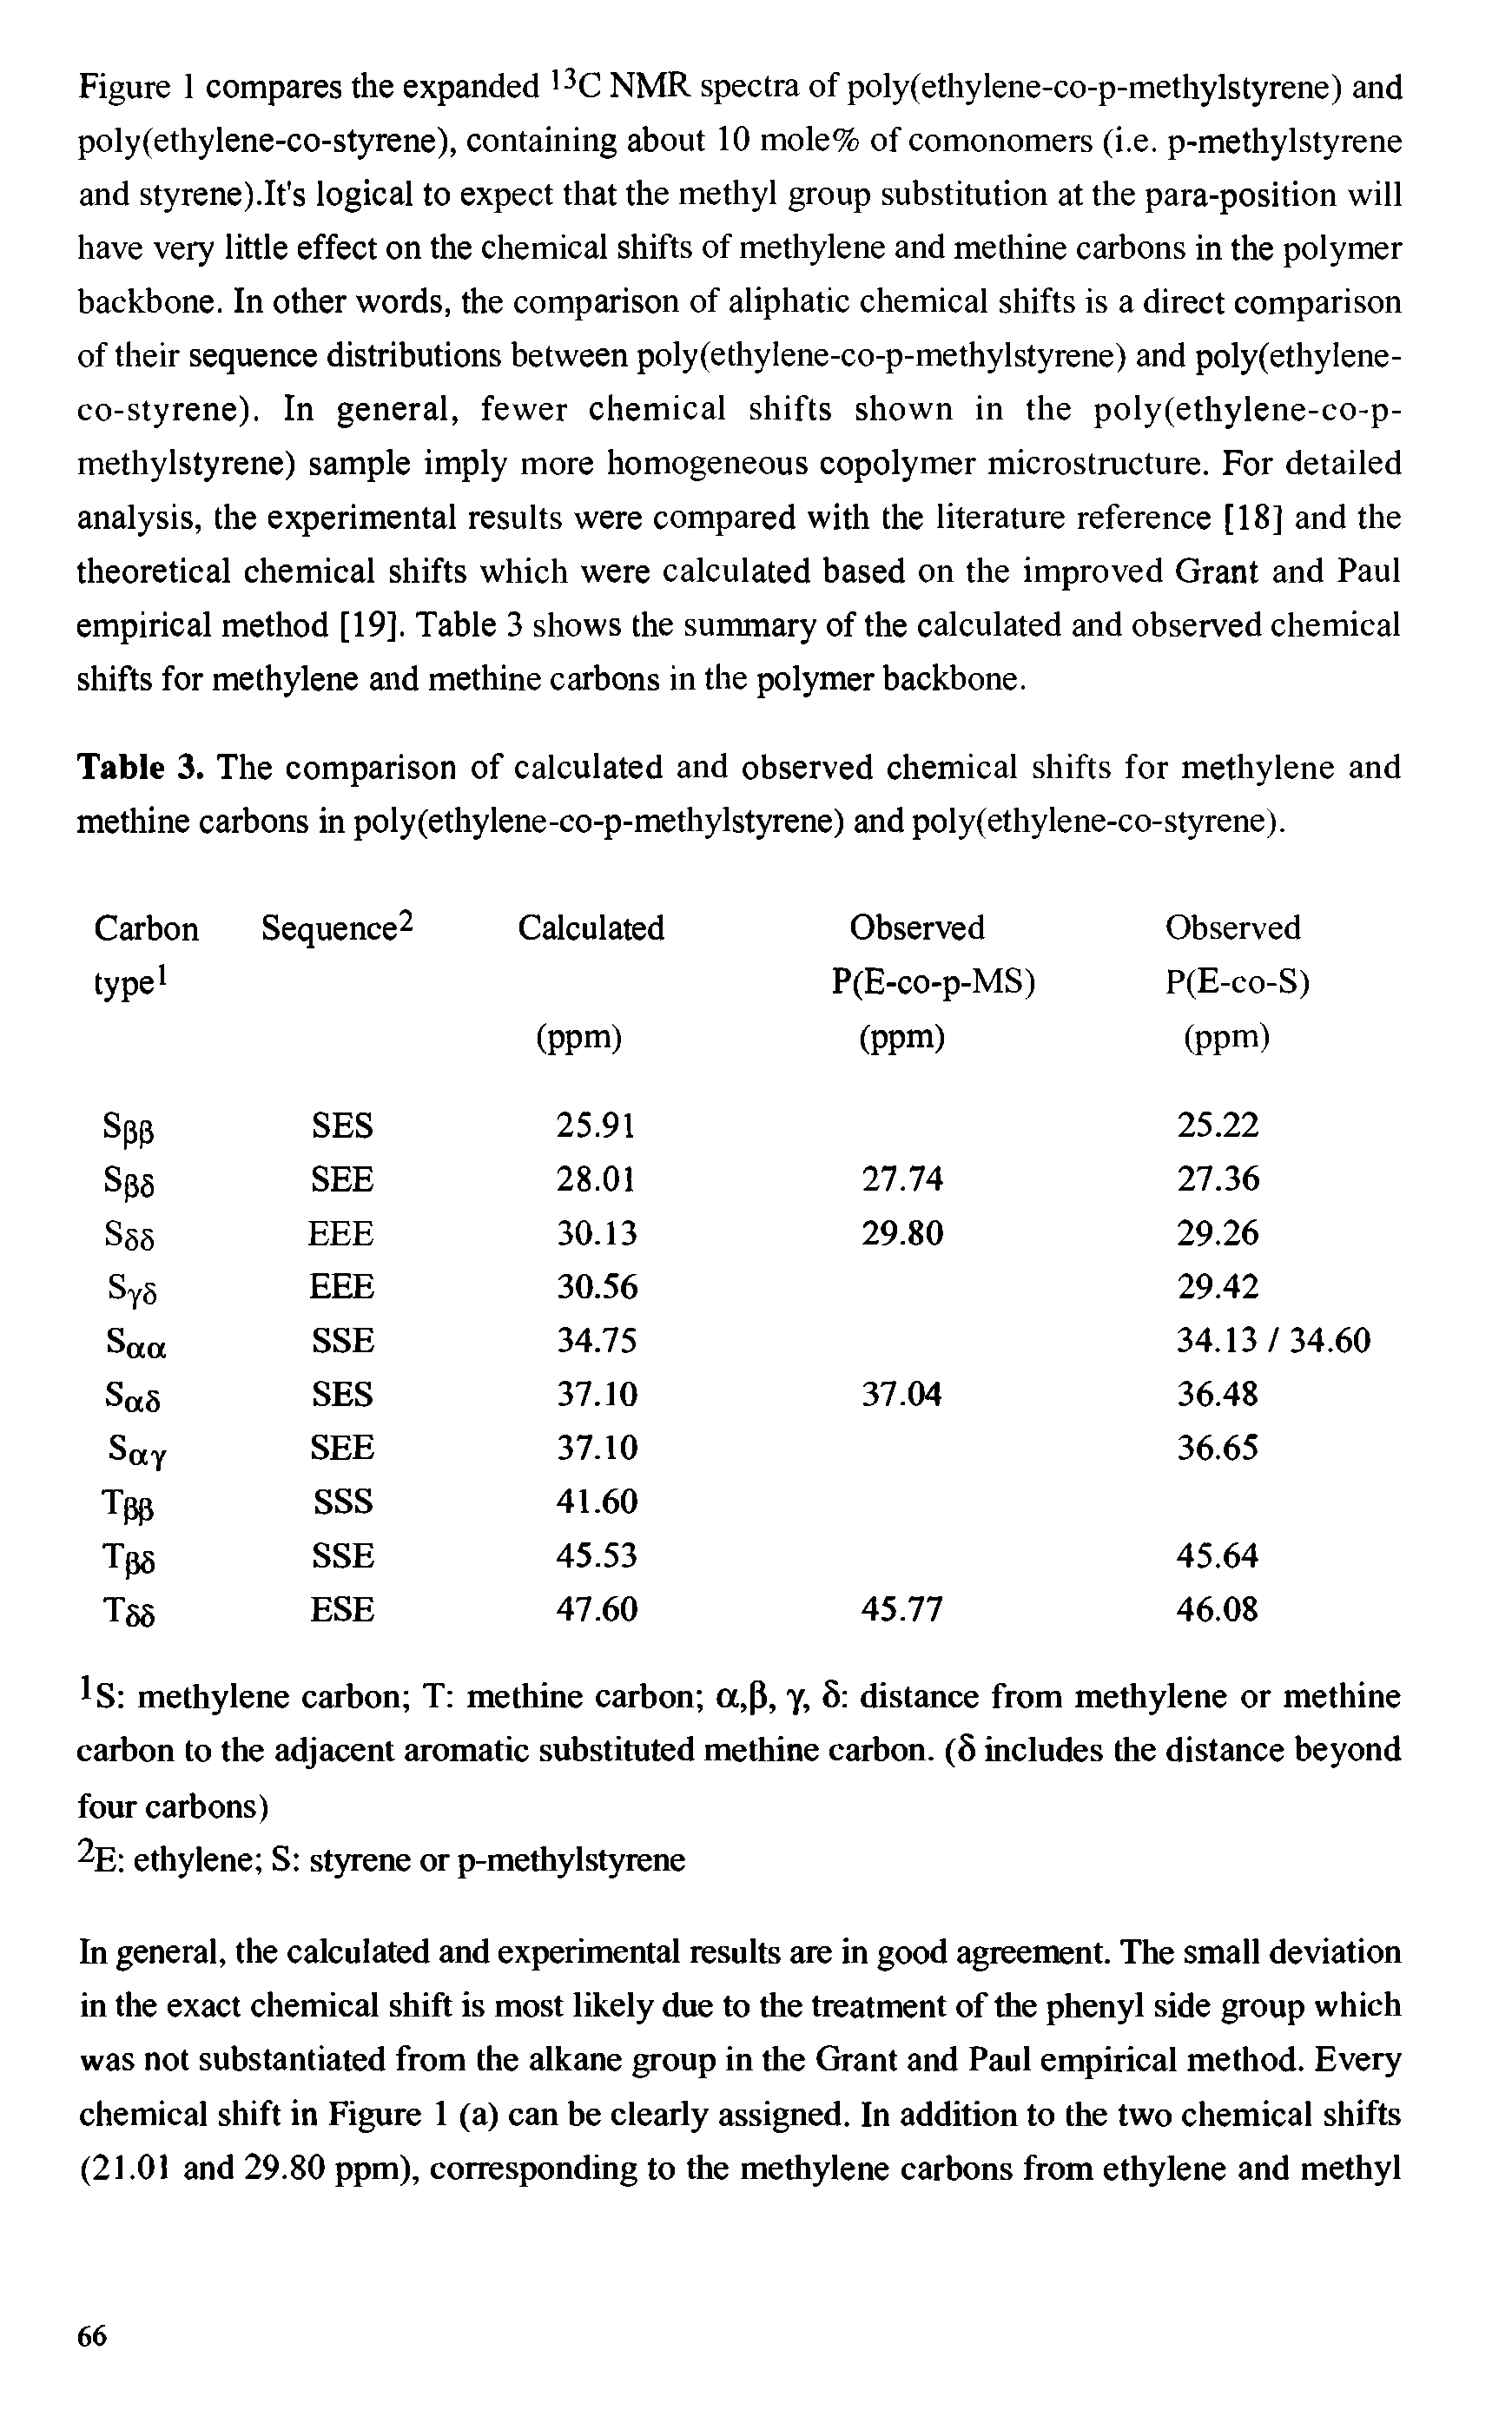 Table 3. The comparison of calculated and observed chemical shifts for methylene and methine carbons in poly(ethylene-co-p-methylstyrene) and poly(ethylene-co-styrene).